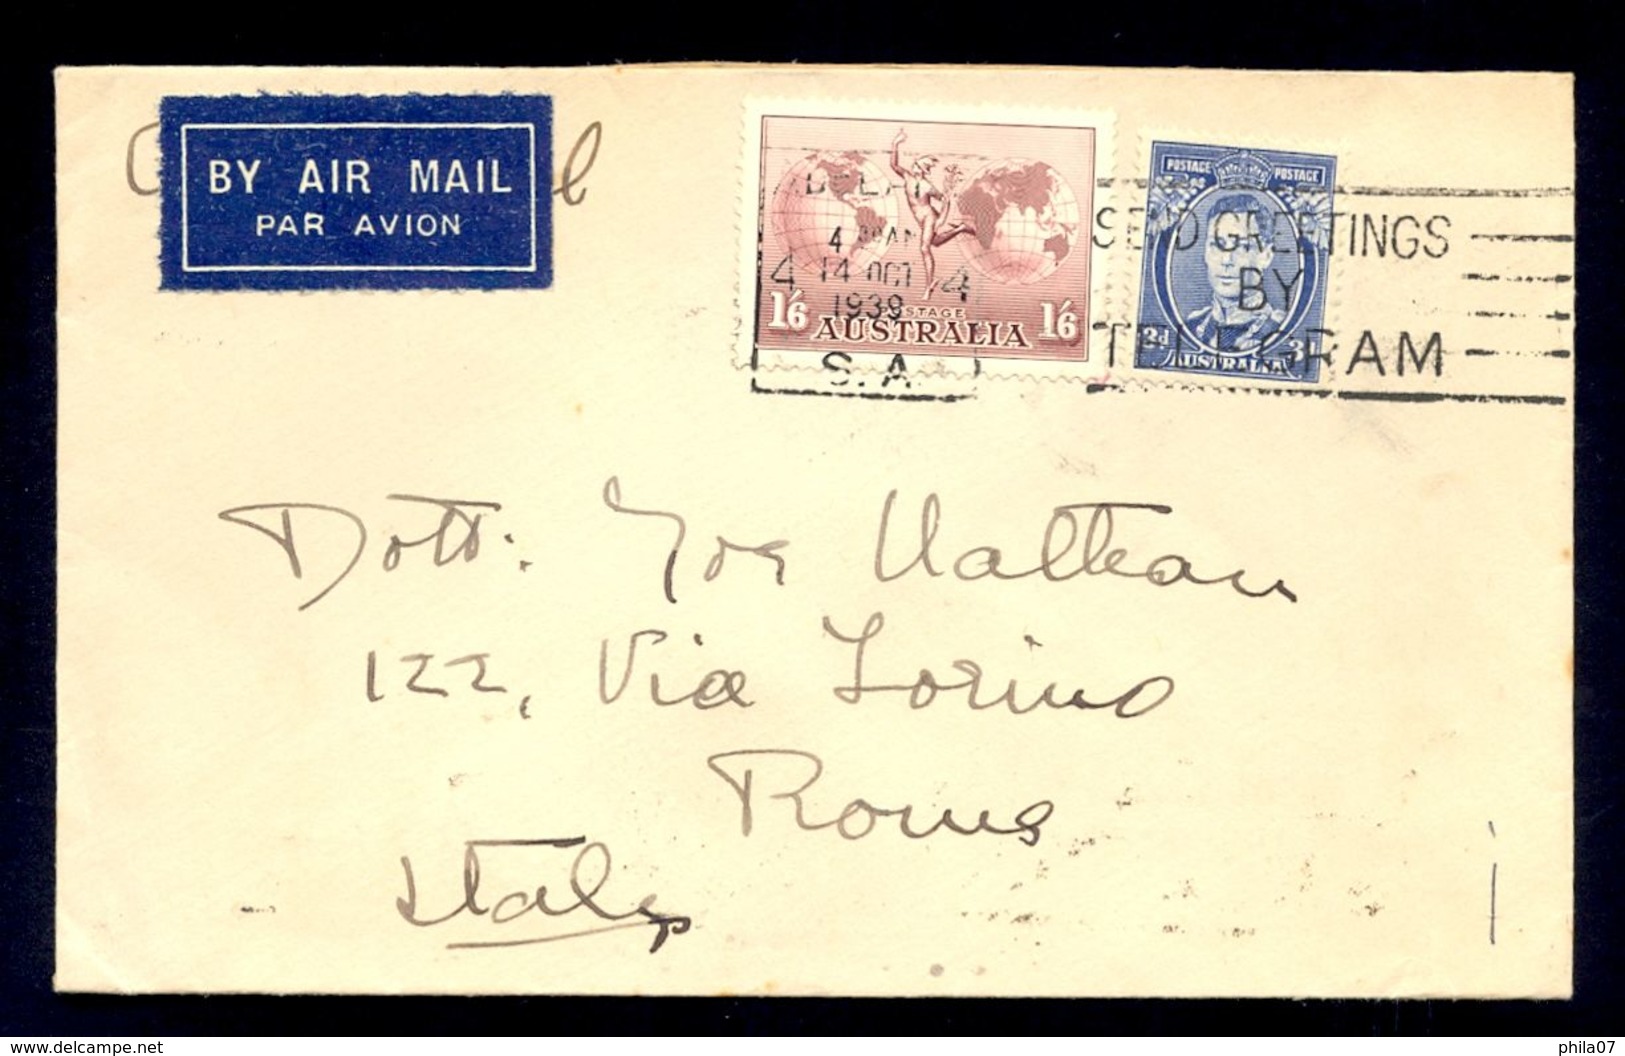 AUSTRALIA - Cover Sent By Air Mail To Roma 1939. Nice Two Colored Franking. Arrival Cancel On The Back Of Cover. - Covers & Documents